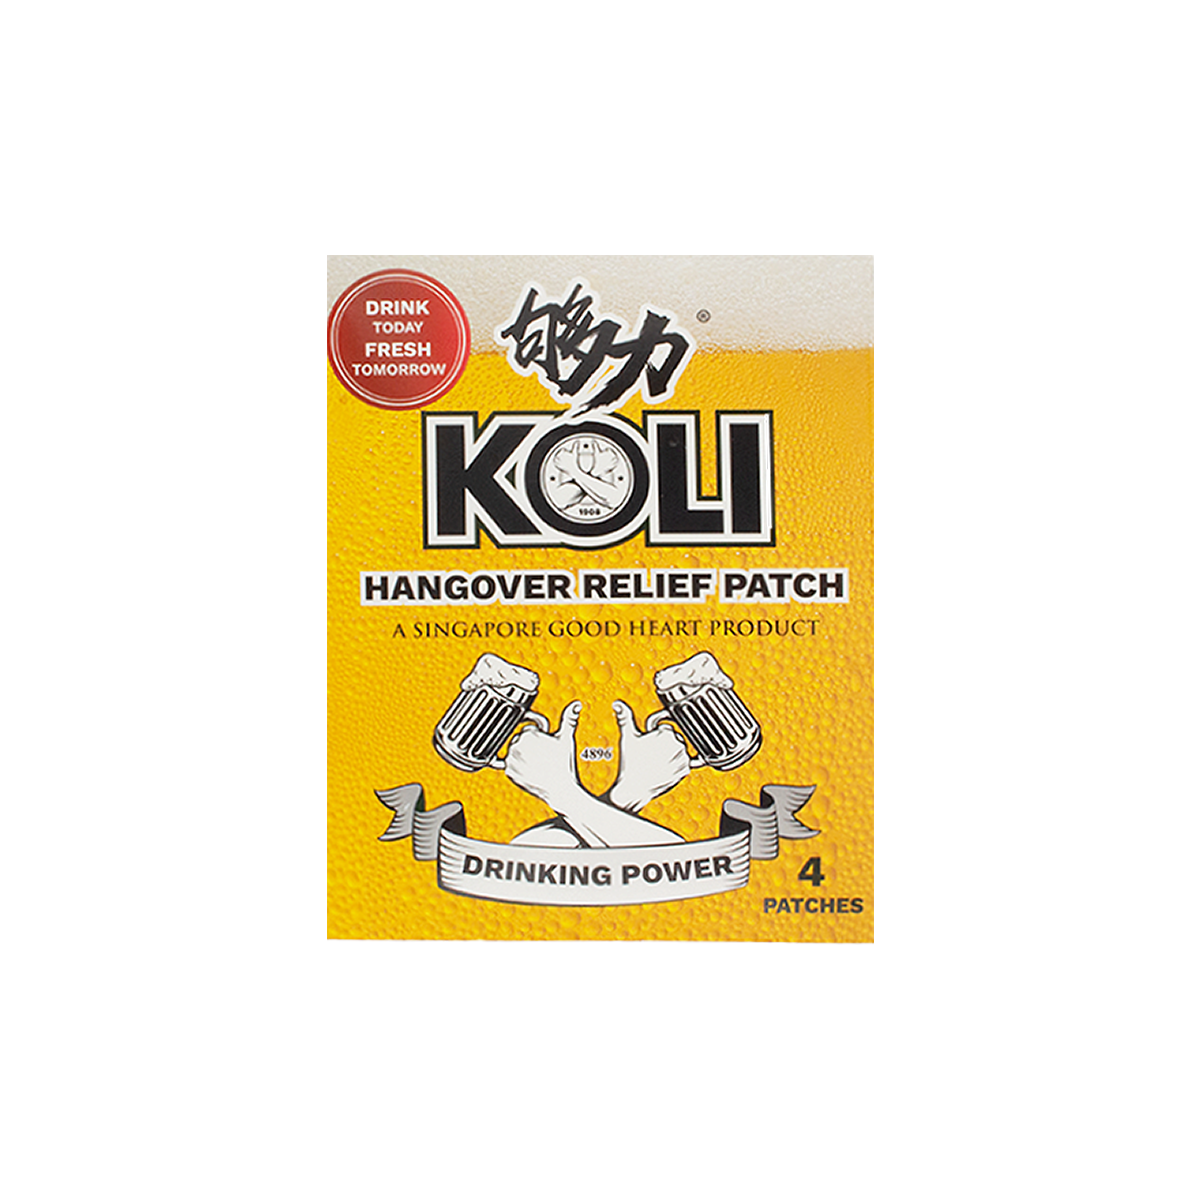 Koli Hangover Relief Patch (4 Patches) – Louree